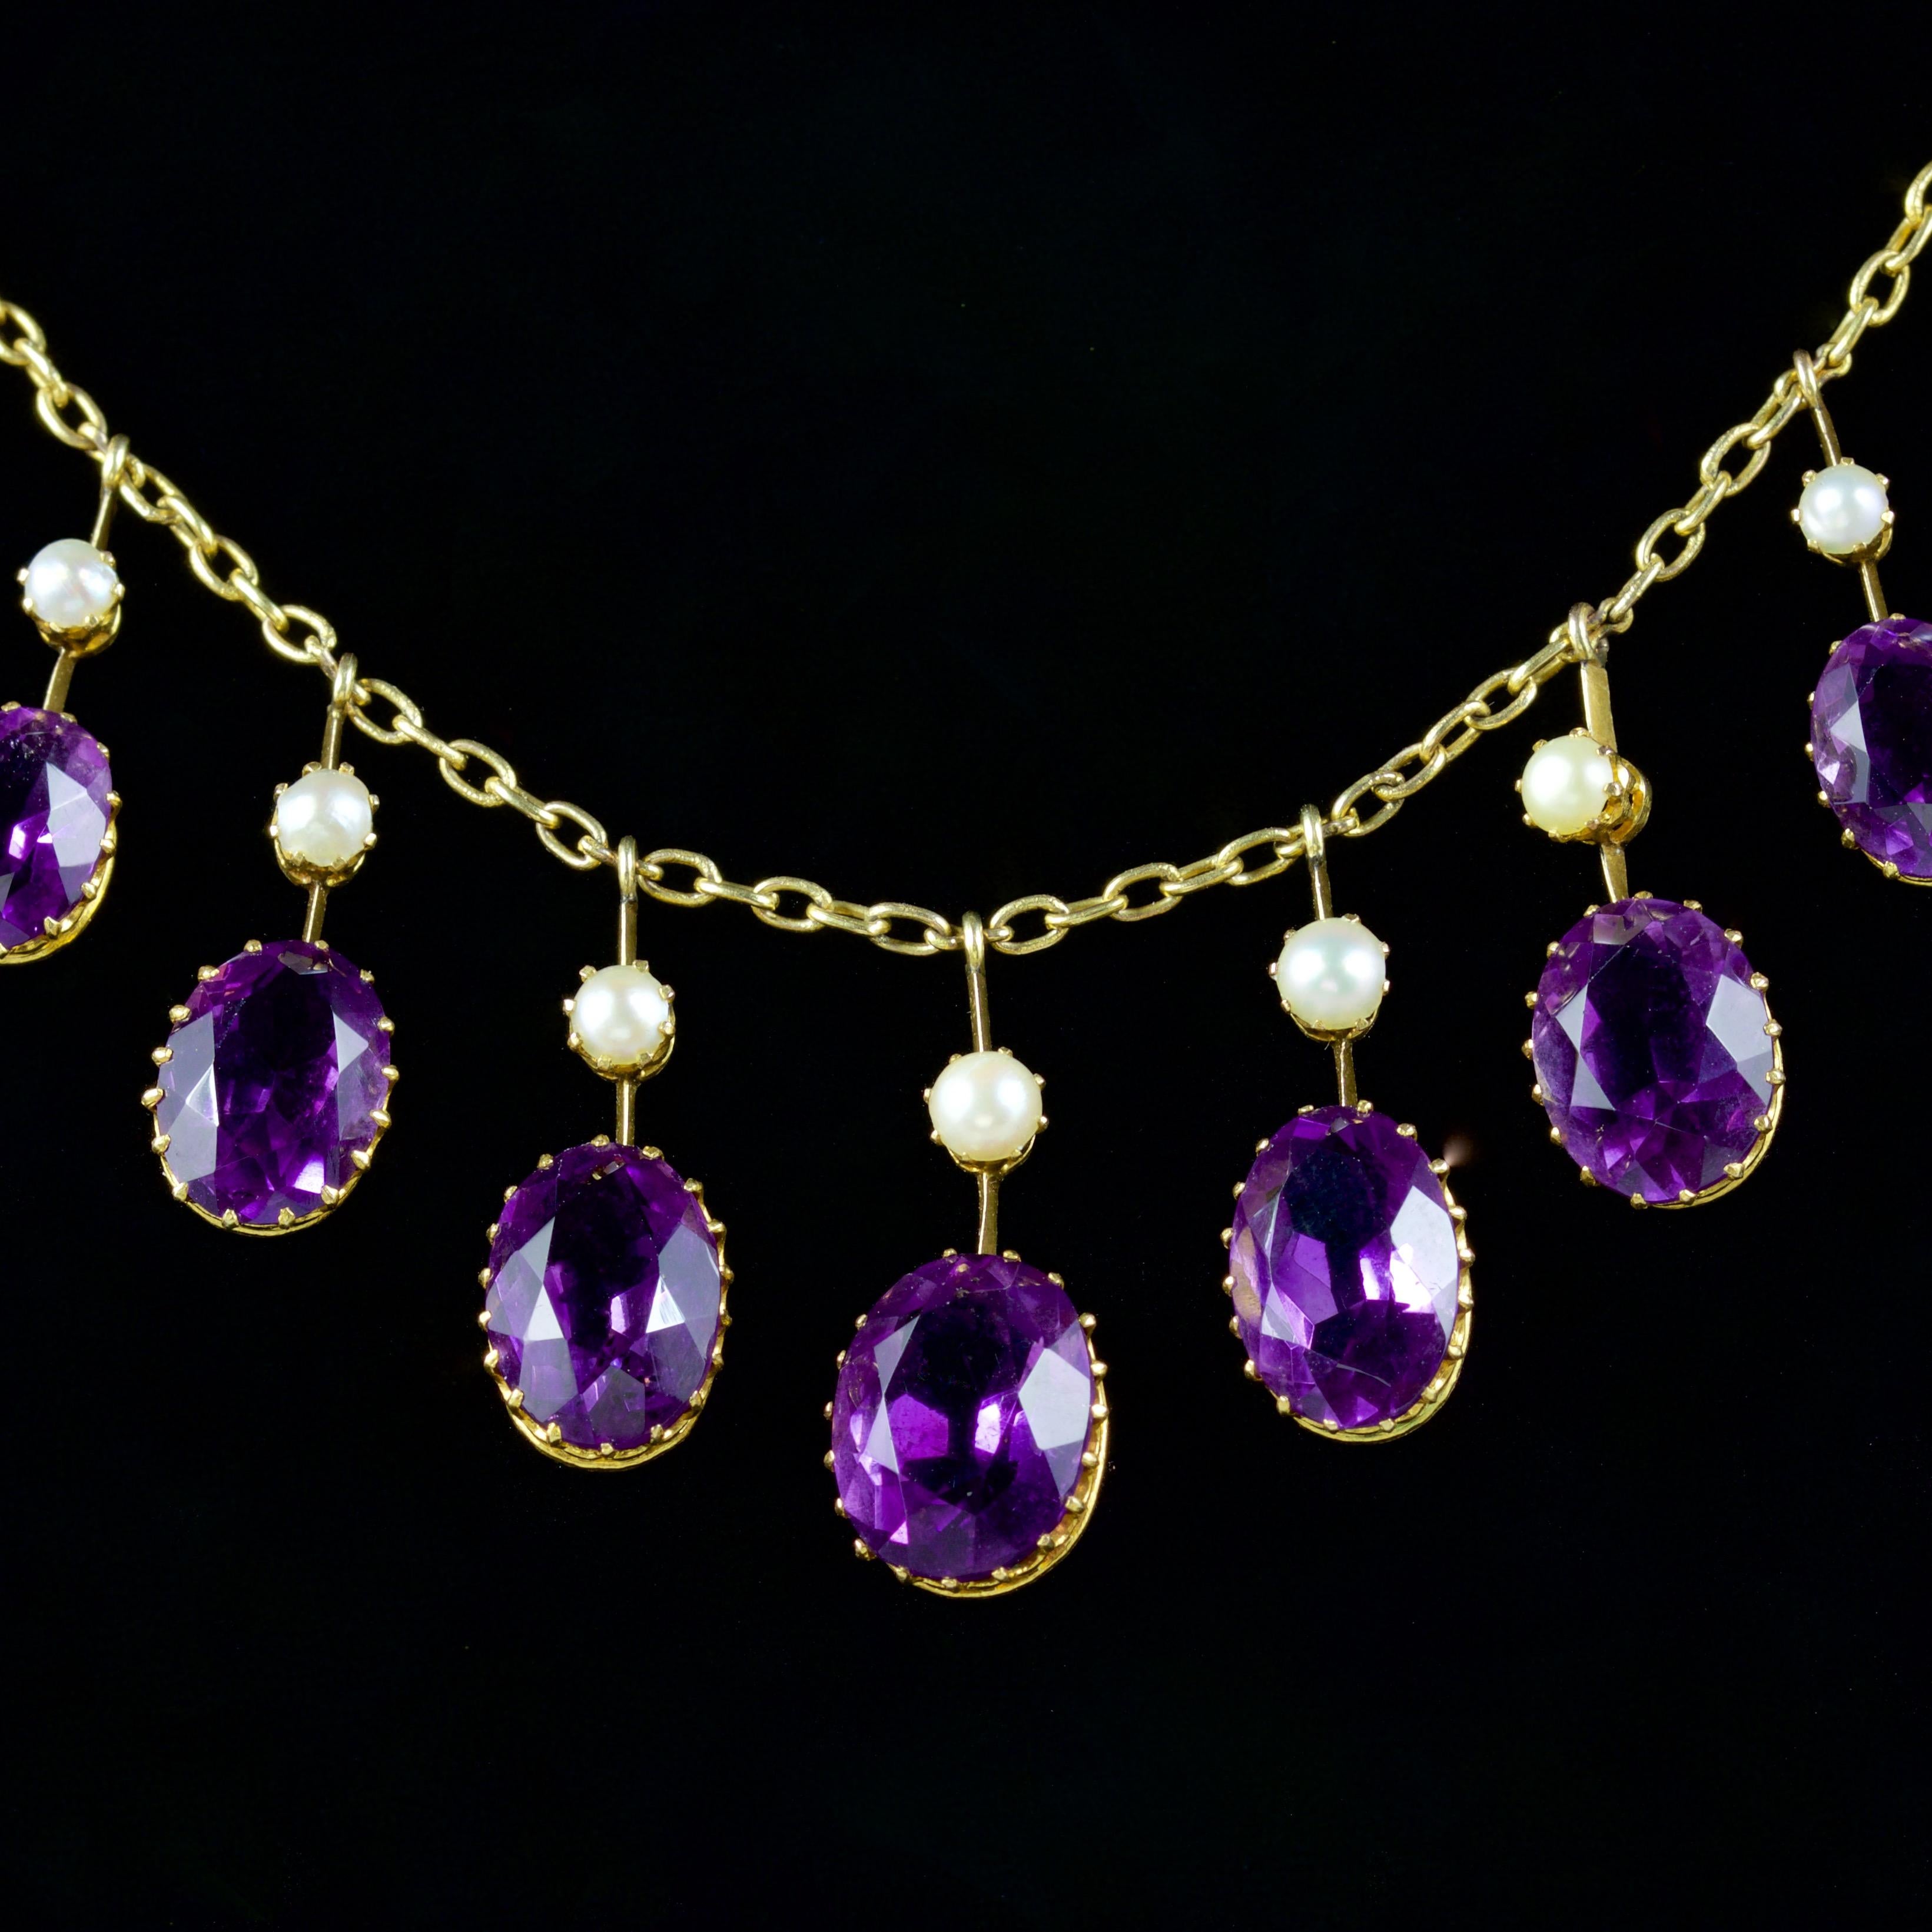 This spectacular Victorian 18ct Amethyst Pearl Garland necklace is, Circa 1880.

This breathtaking Amethyst and Pearl Garland necklace is set with Velvet Amethysts that are complimented by lovely lustrous seed Pearls.

The largest Amethyst is 3ct,